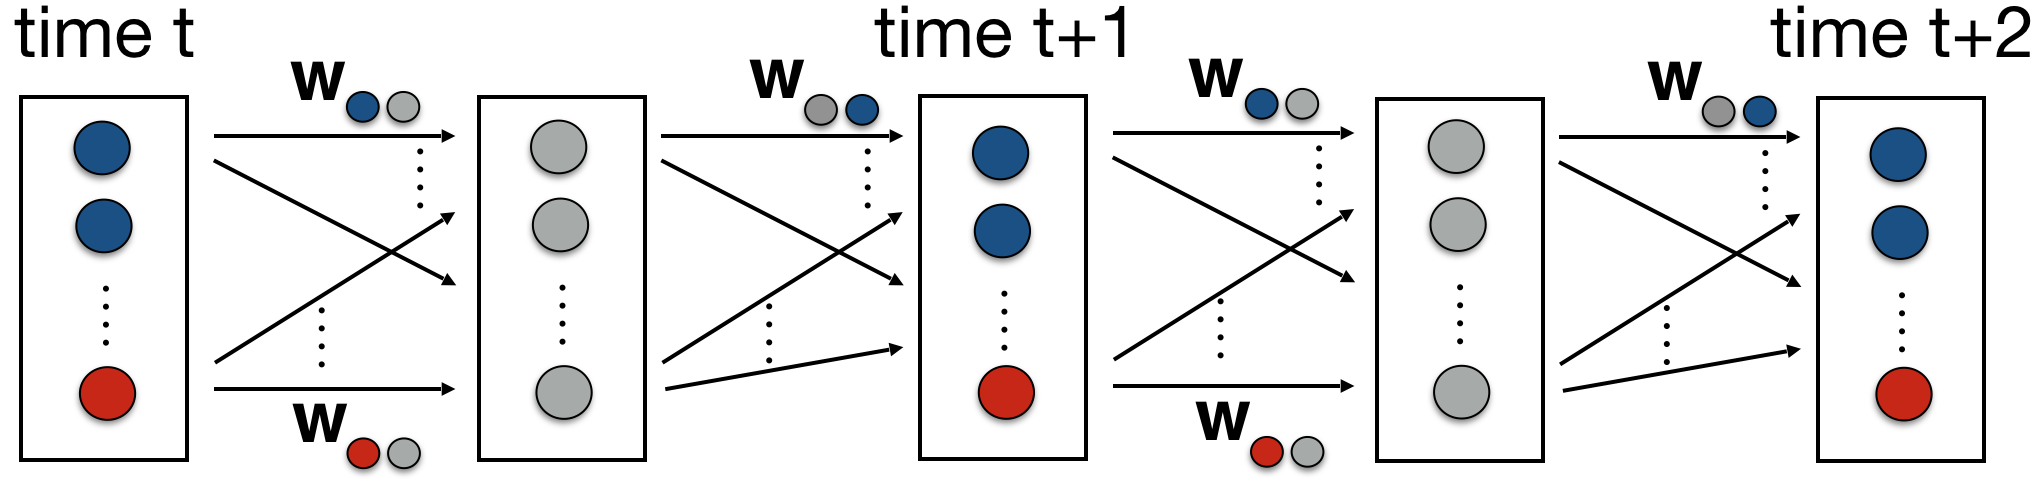 Figure 1: Visualization of the learning and planning framework presented in [5] where red circles represent action variables, blue circles represent state variables, gray circles represent the activation units and w's represent the weights of the neural network.